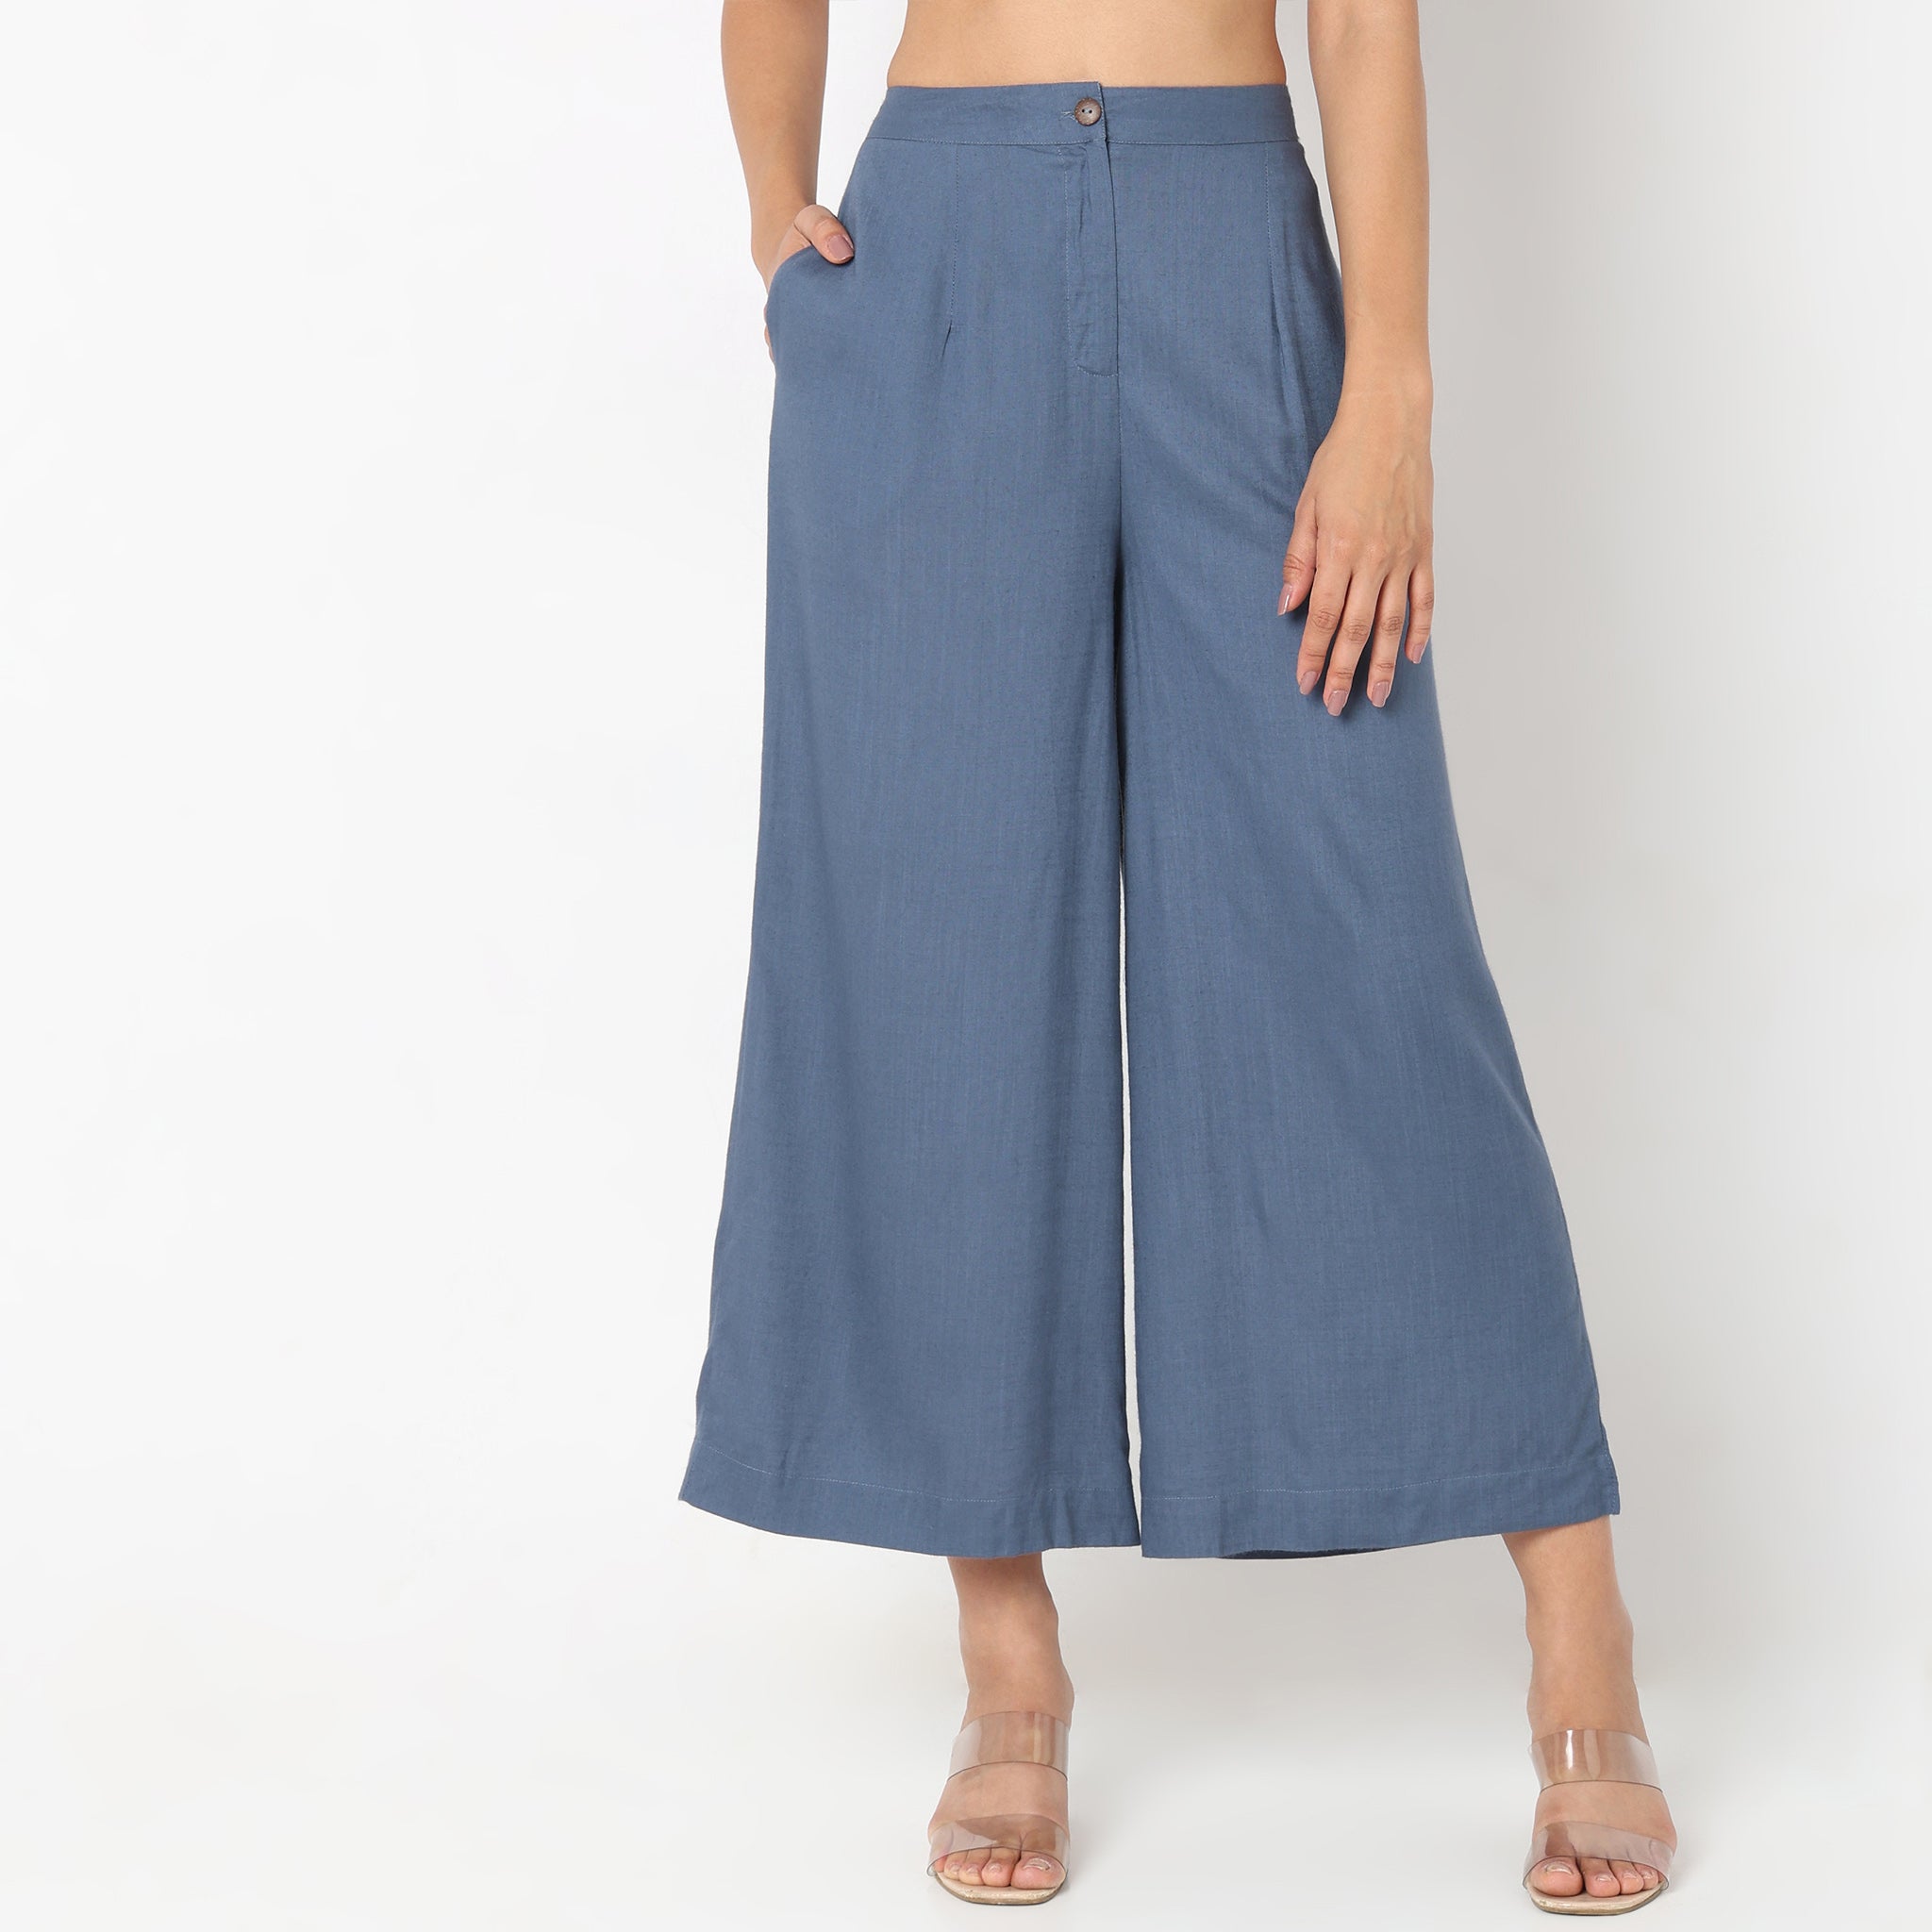 Buy V3E Casual Flared Denim Palazzo Pants for Women (Light Blue,32)-(Pack  of 02) at Amazon.in